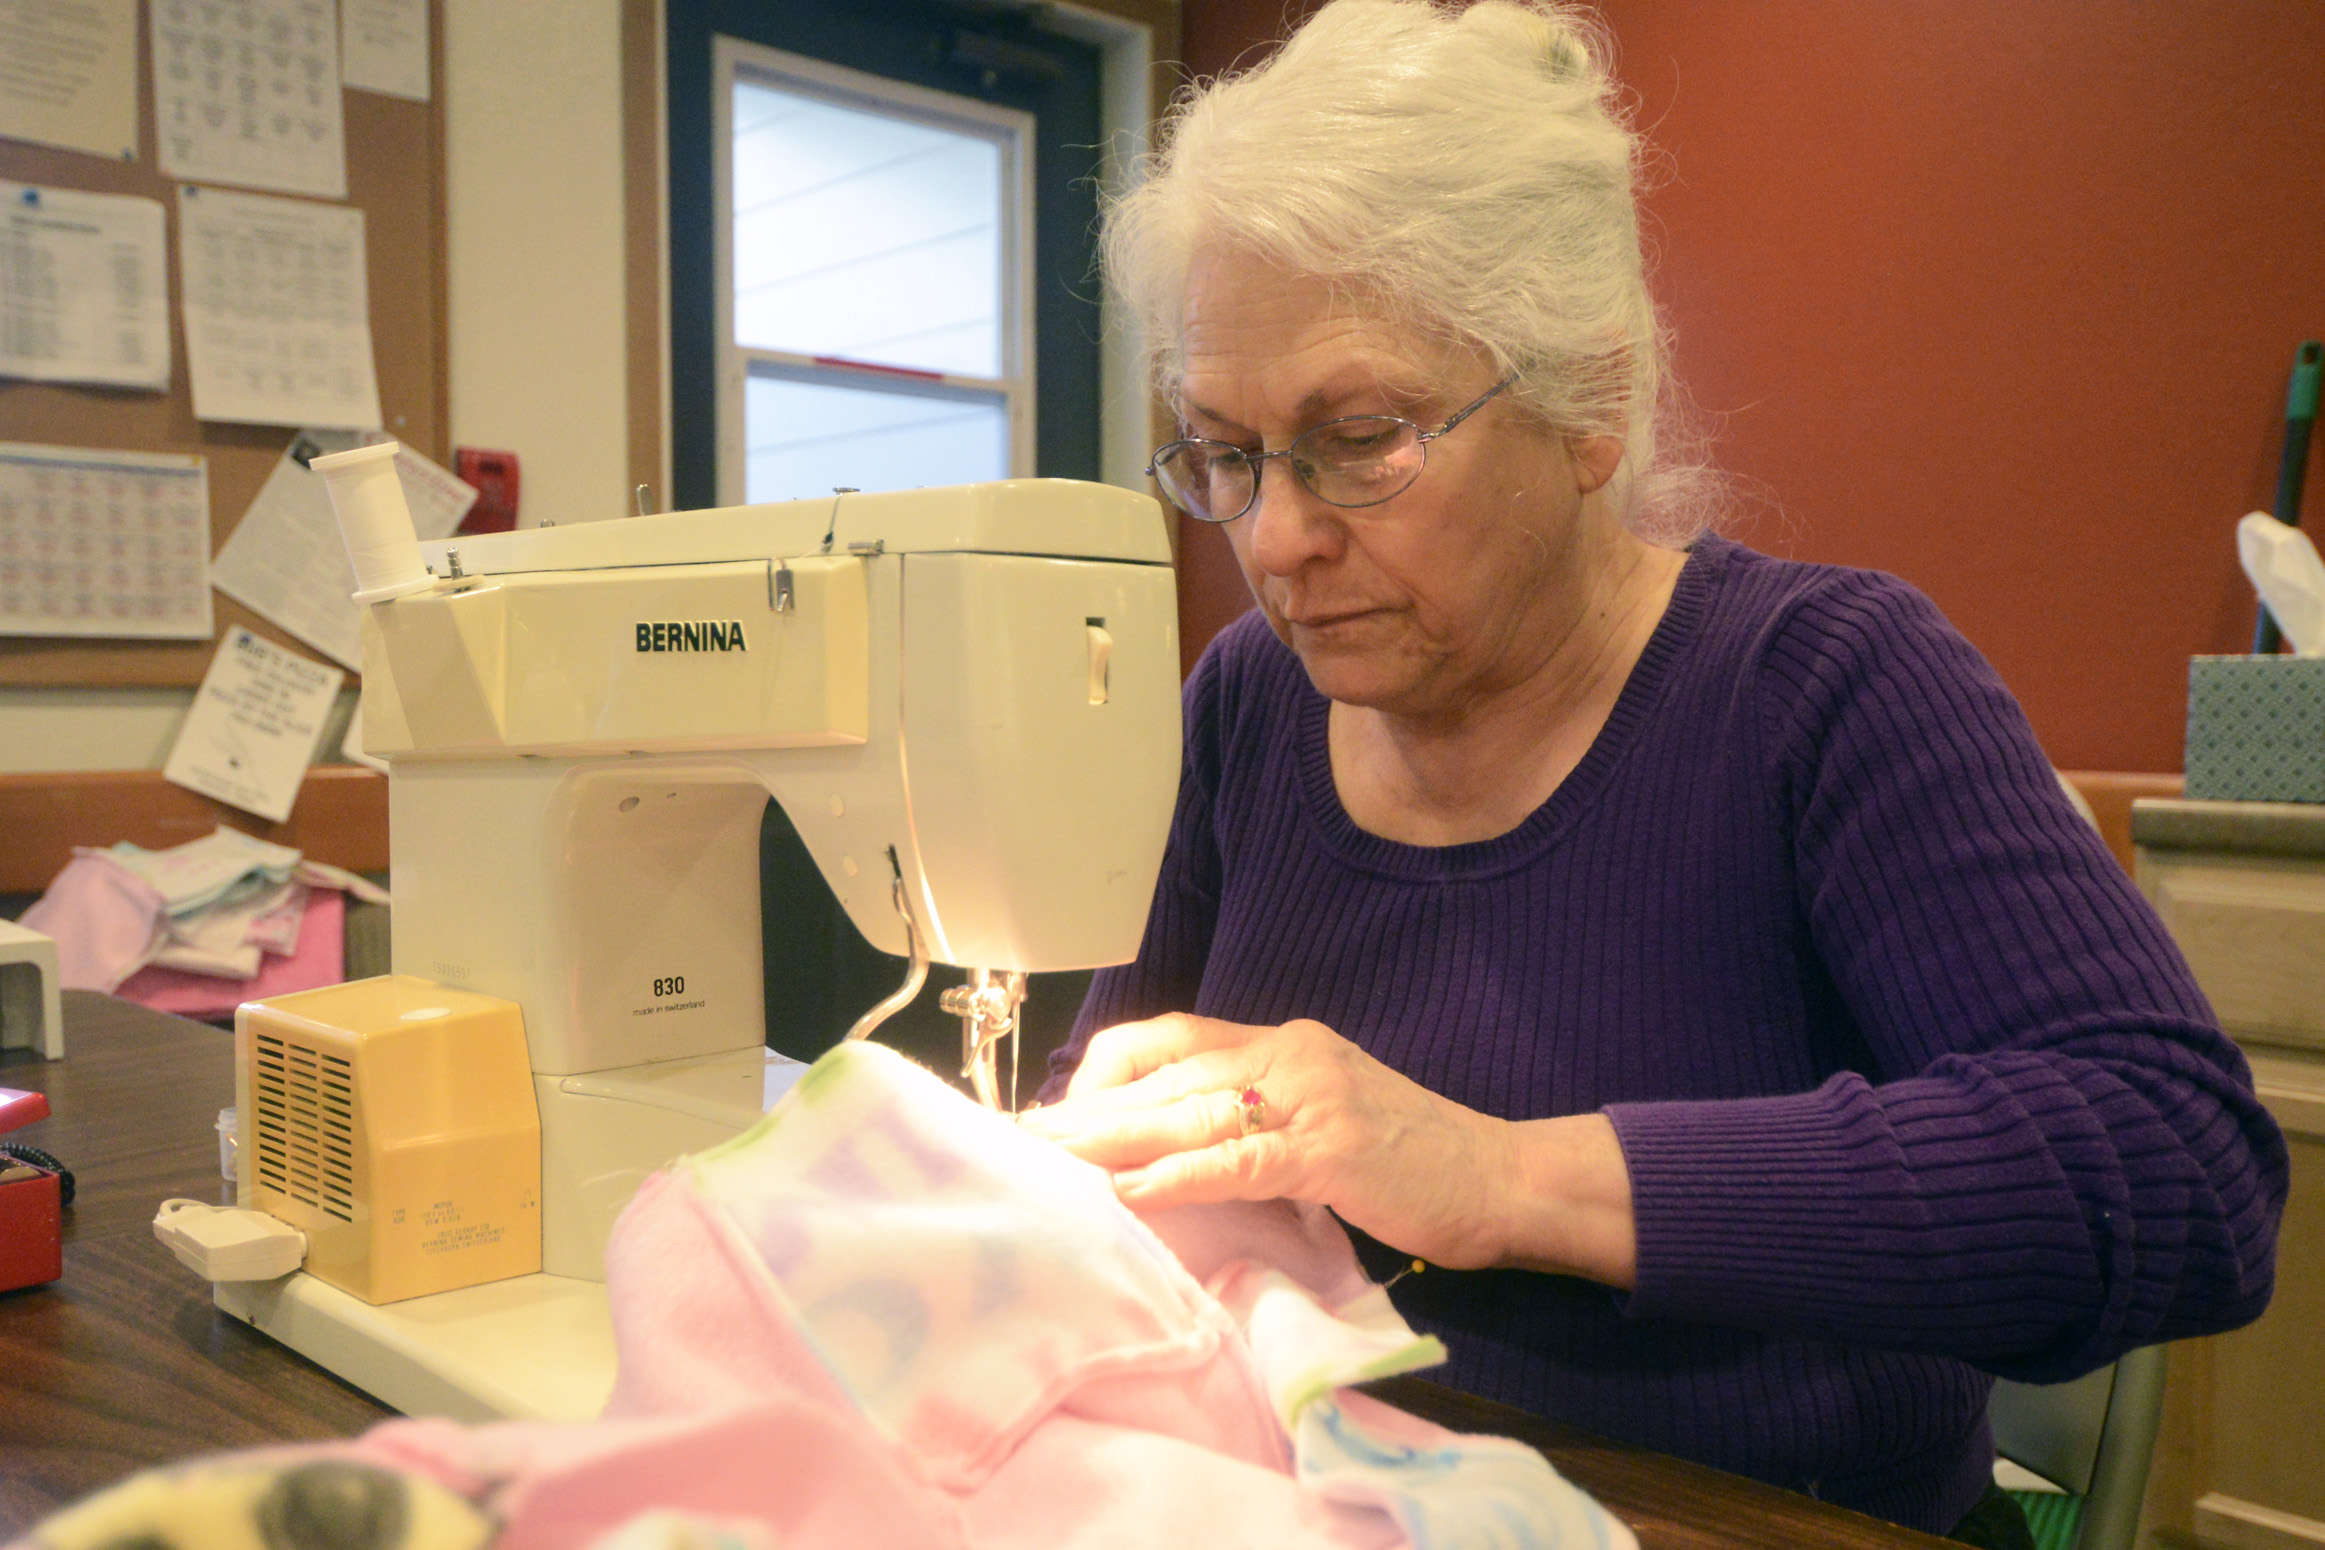 Colleen Maricle works on an unfinished quilt during a craft session on Tuesday, March 1, 2016 at Northwood Apartments in Soldotna, Alaska. A group of local crafters make and donate quilts to Alaska State Troopers and other organizations for them to give out to children in need.